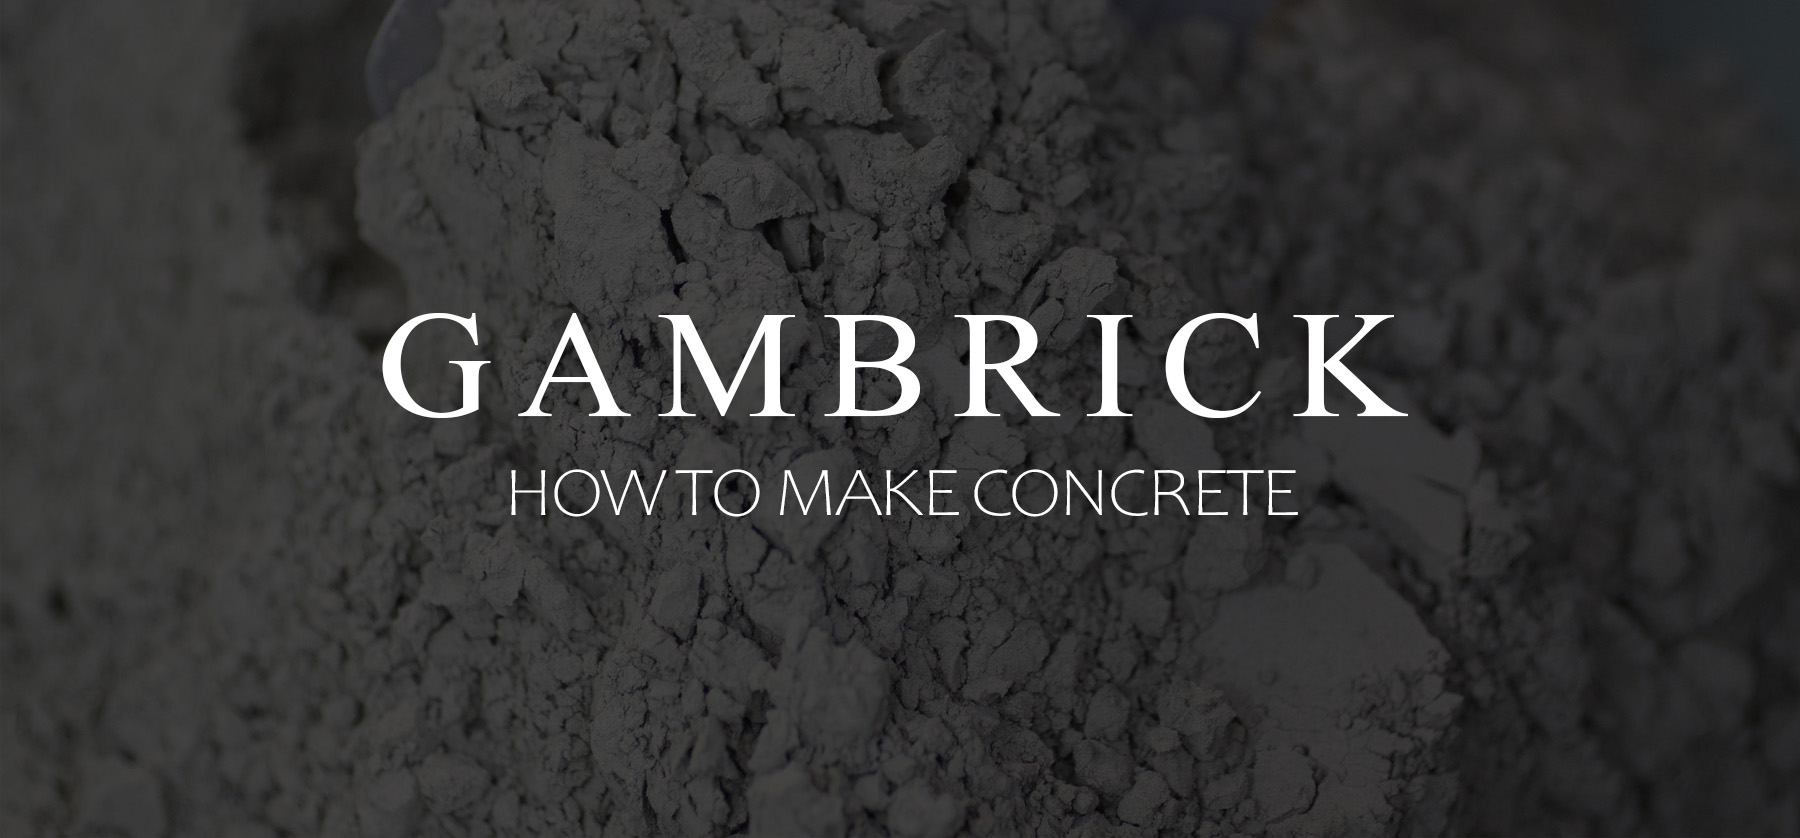 how to make concrete banner 1